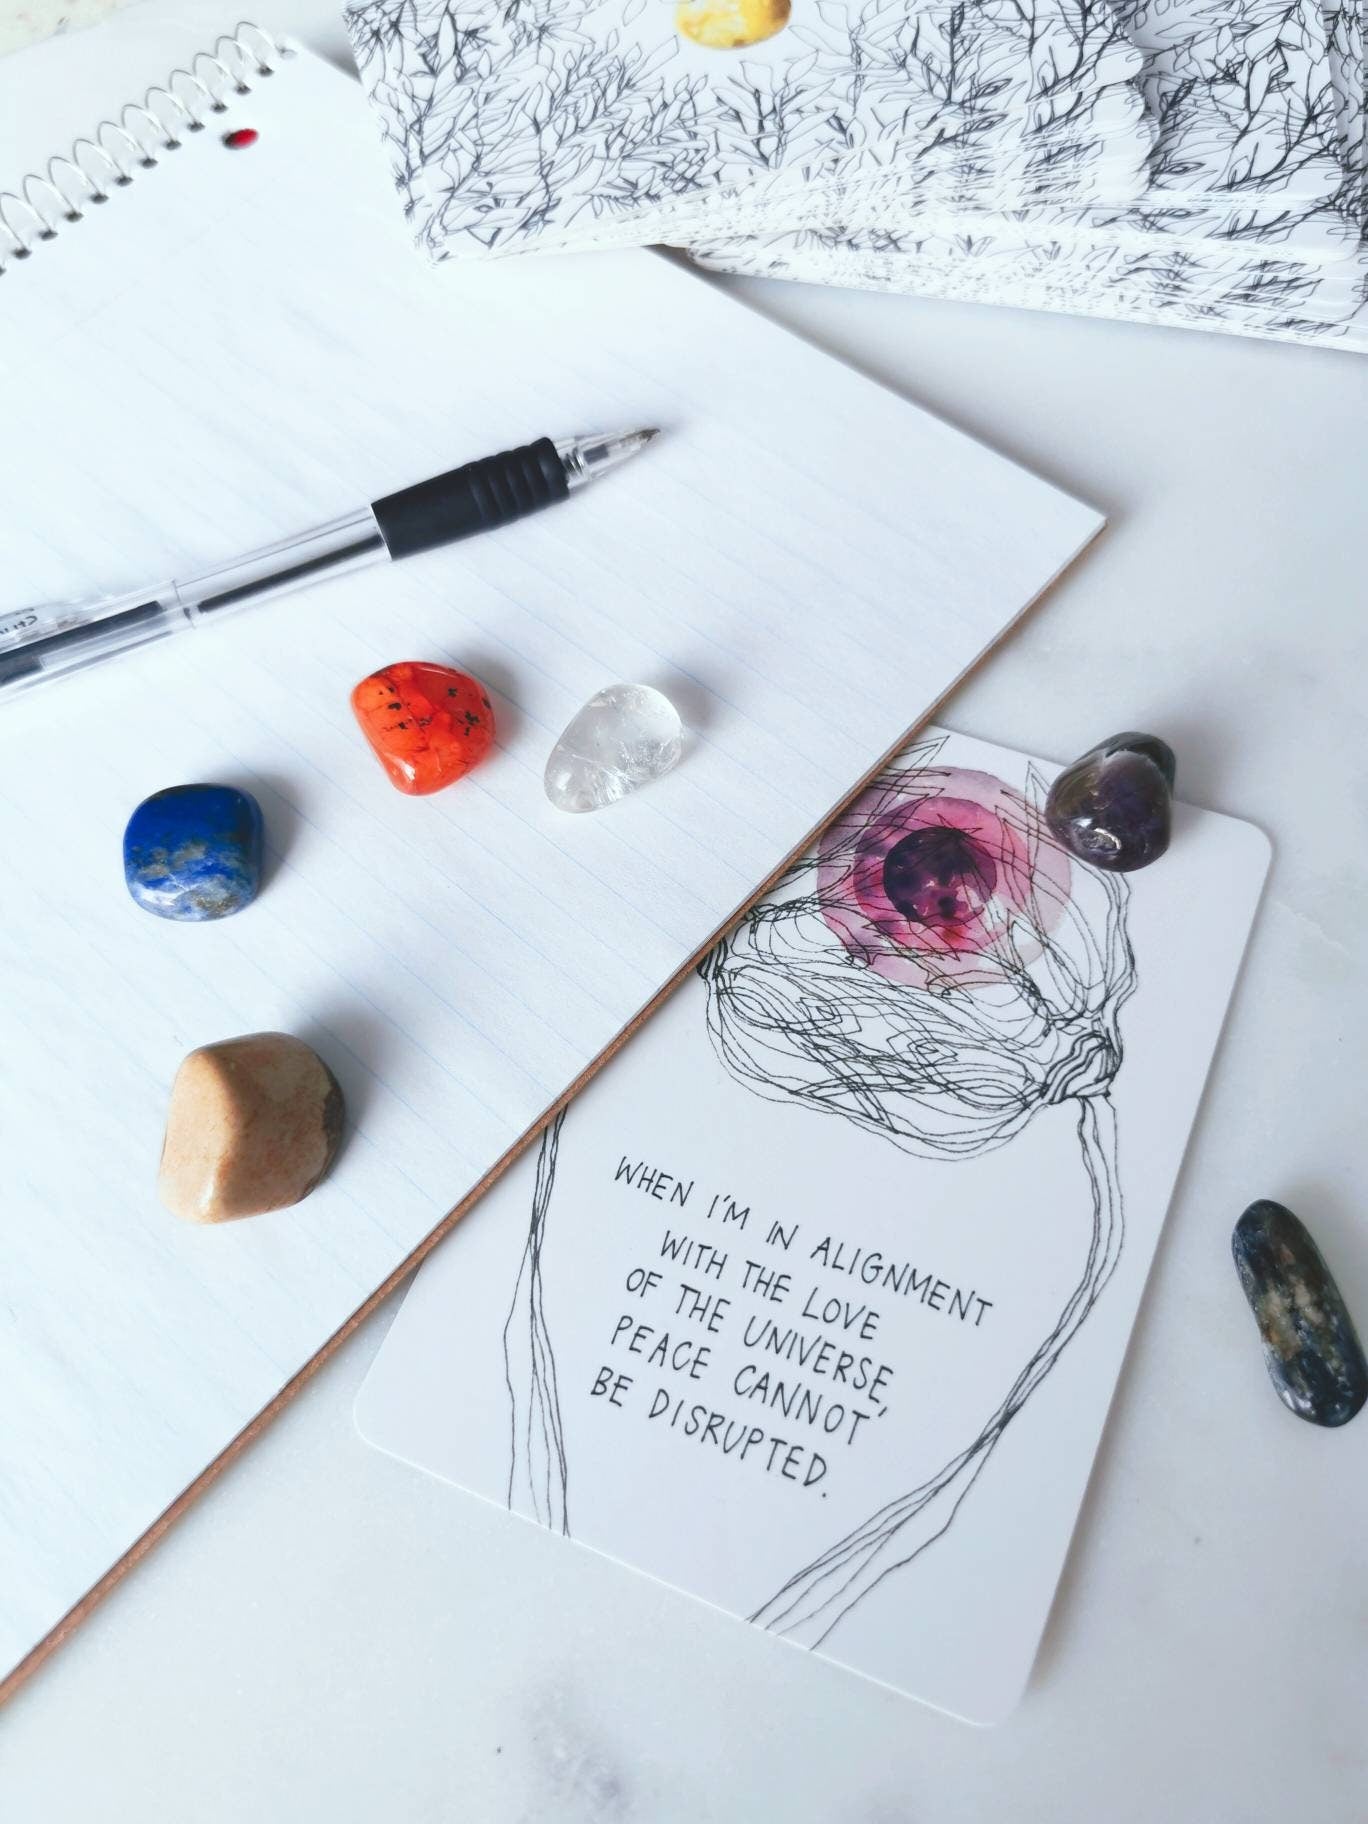 Intention-Infused Journaling Crystals Set